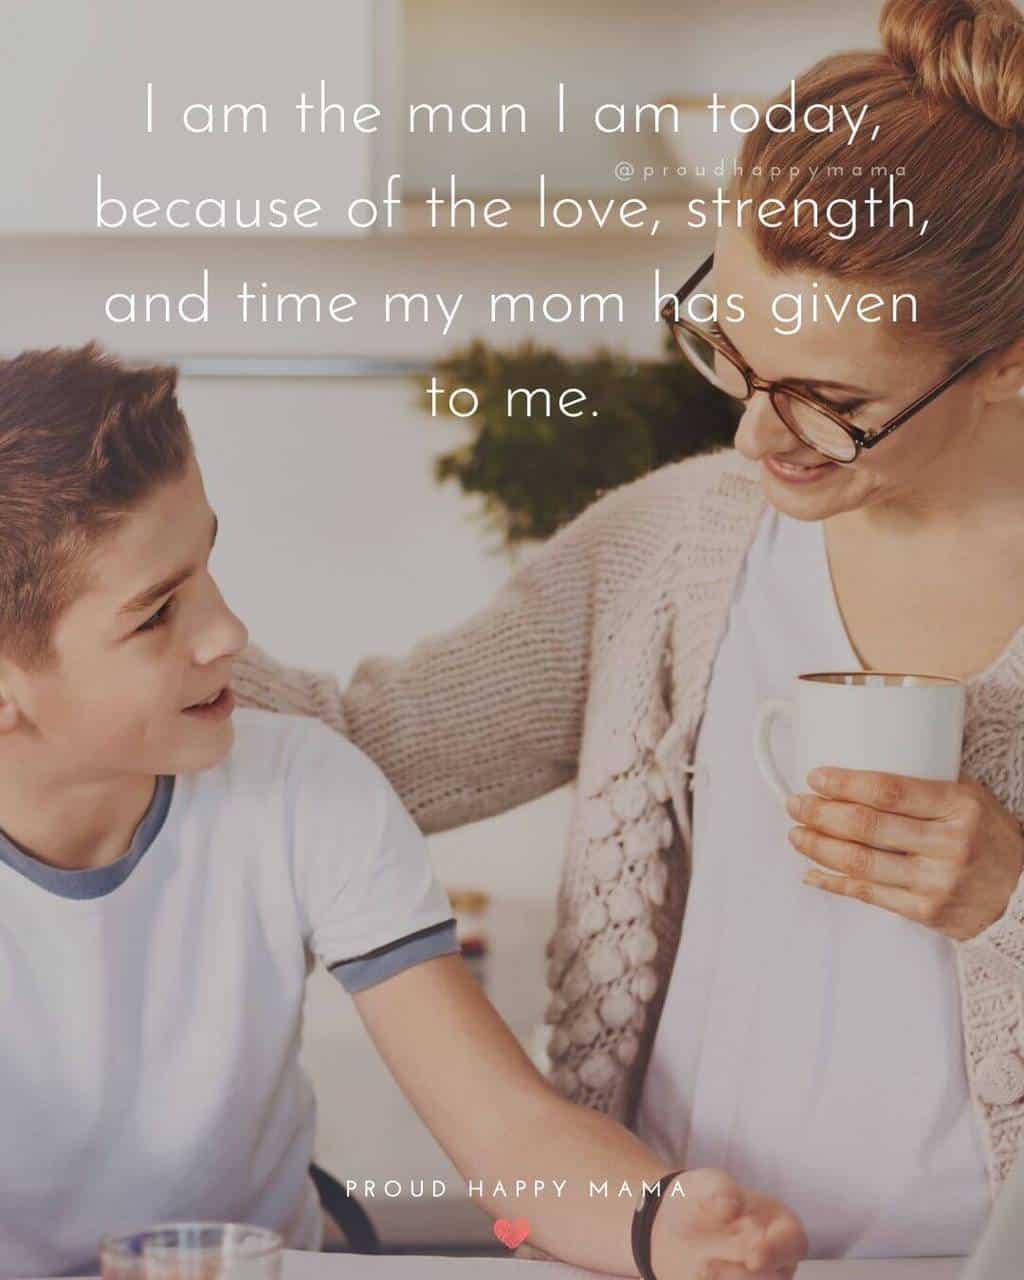 Mother And Son Quotes | I am the man I am today, because of the love, strength, and time my mom has given to me.